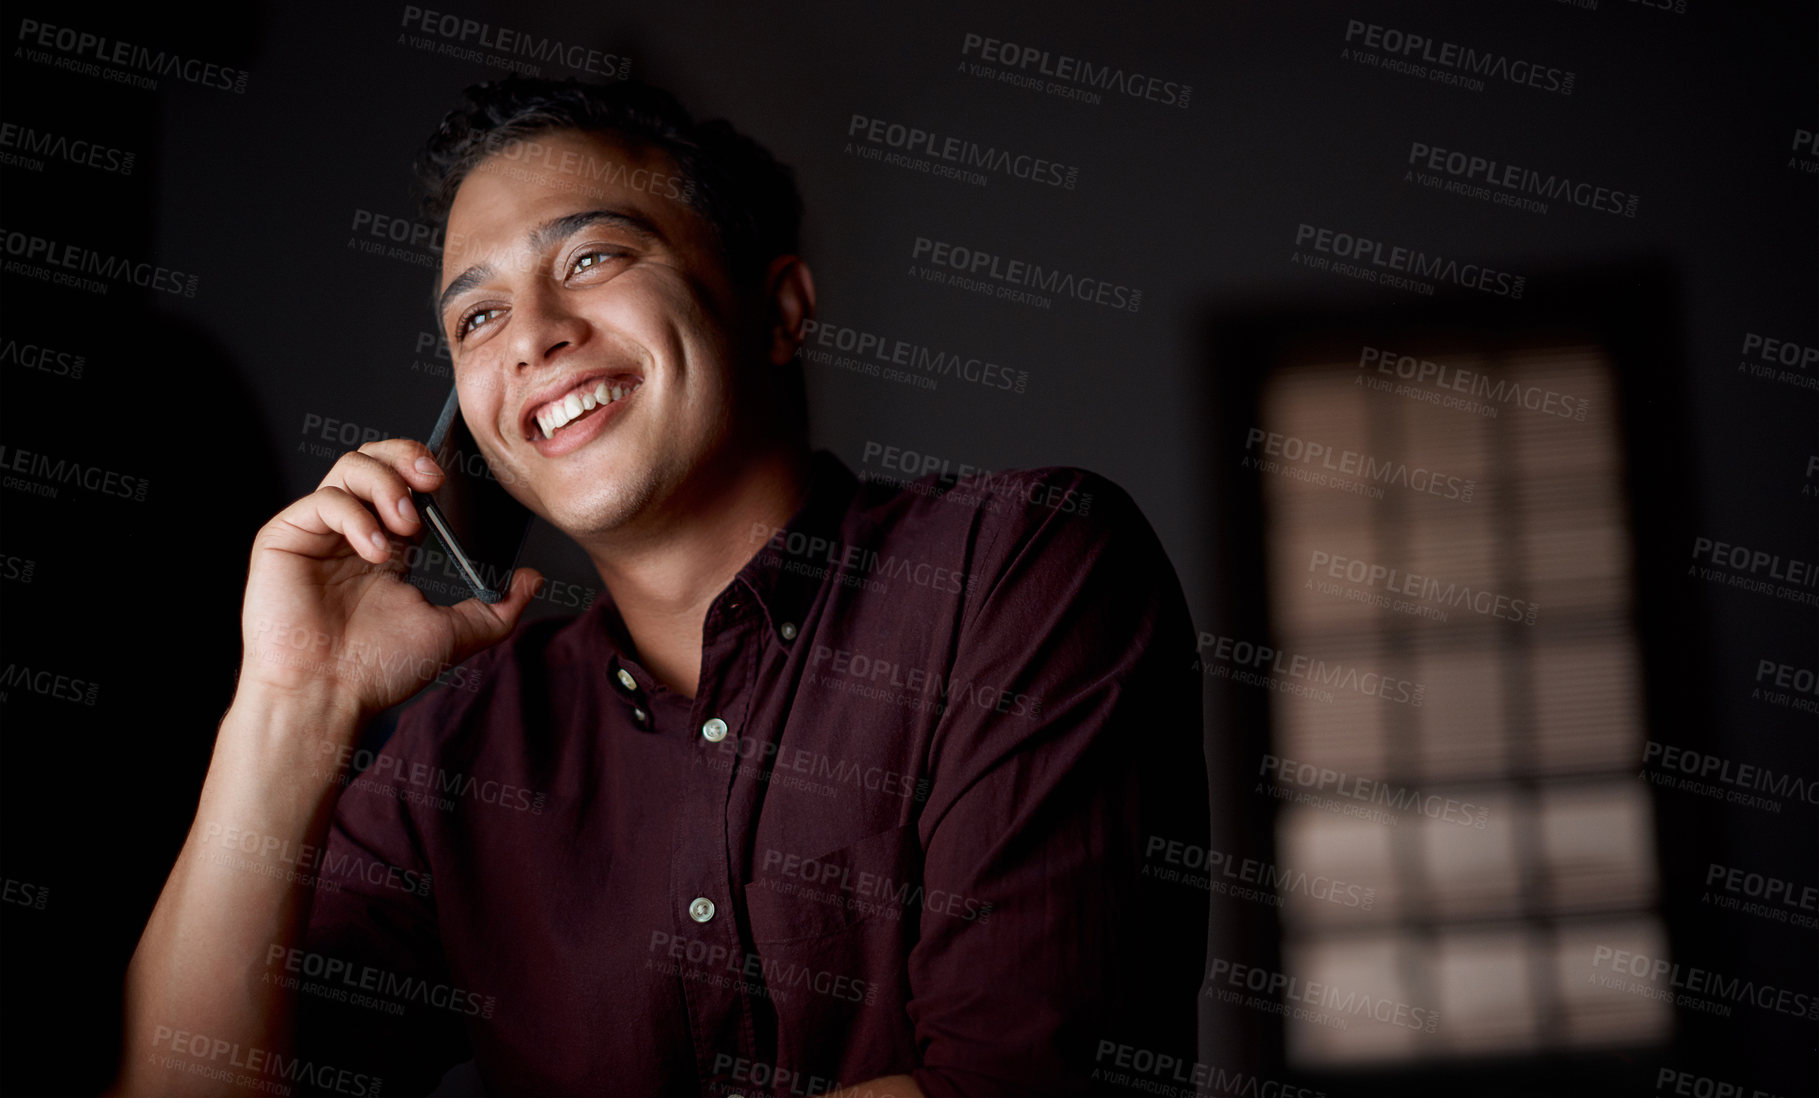 Buy stock photo Shot of a young businessman talking on a cellphone in an office at night